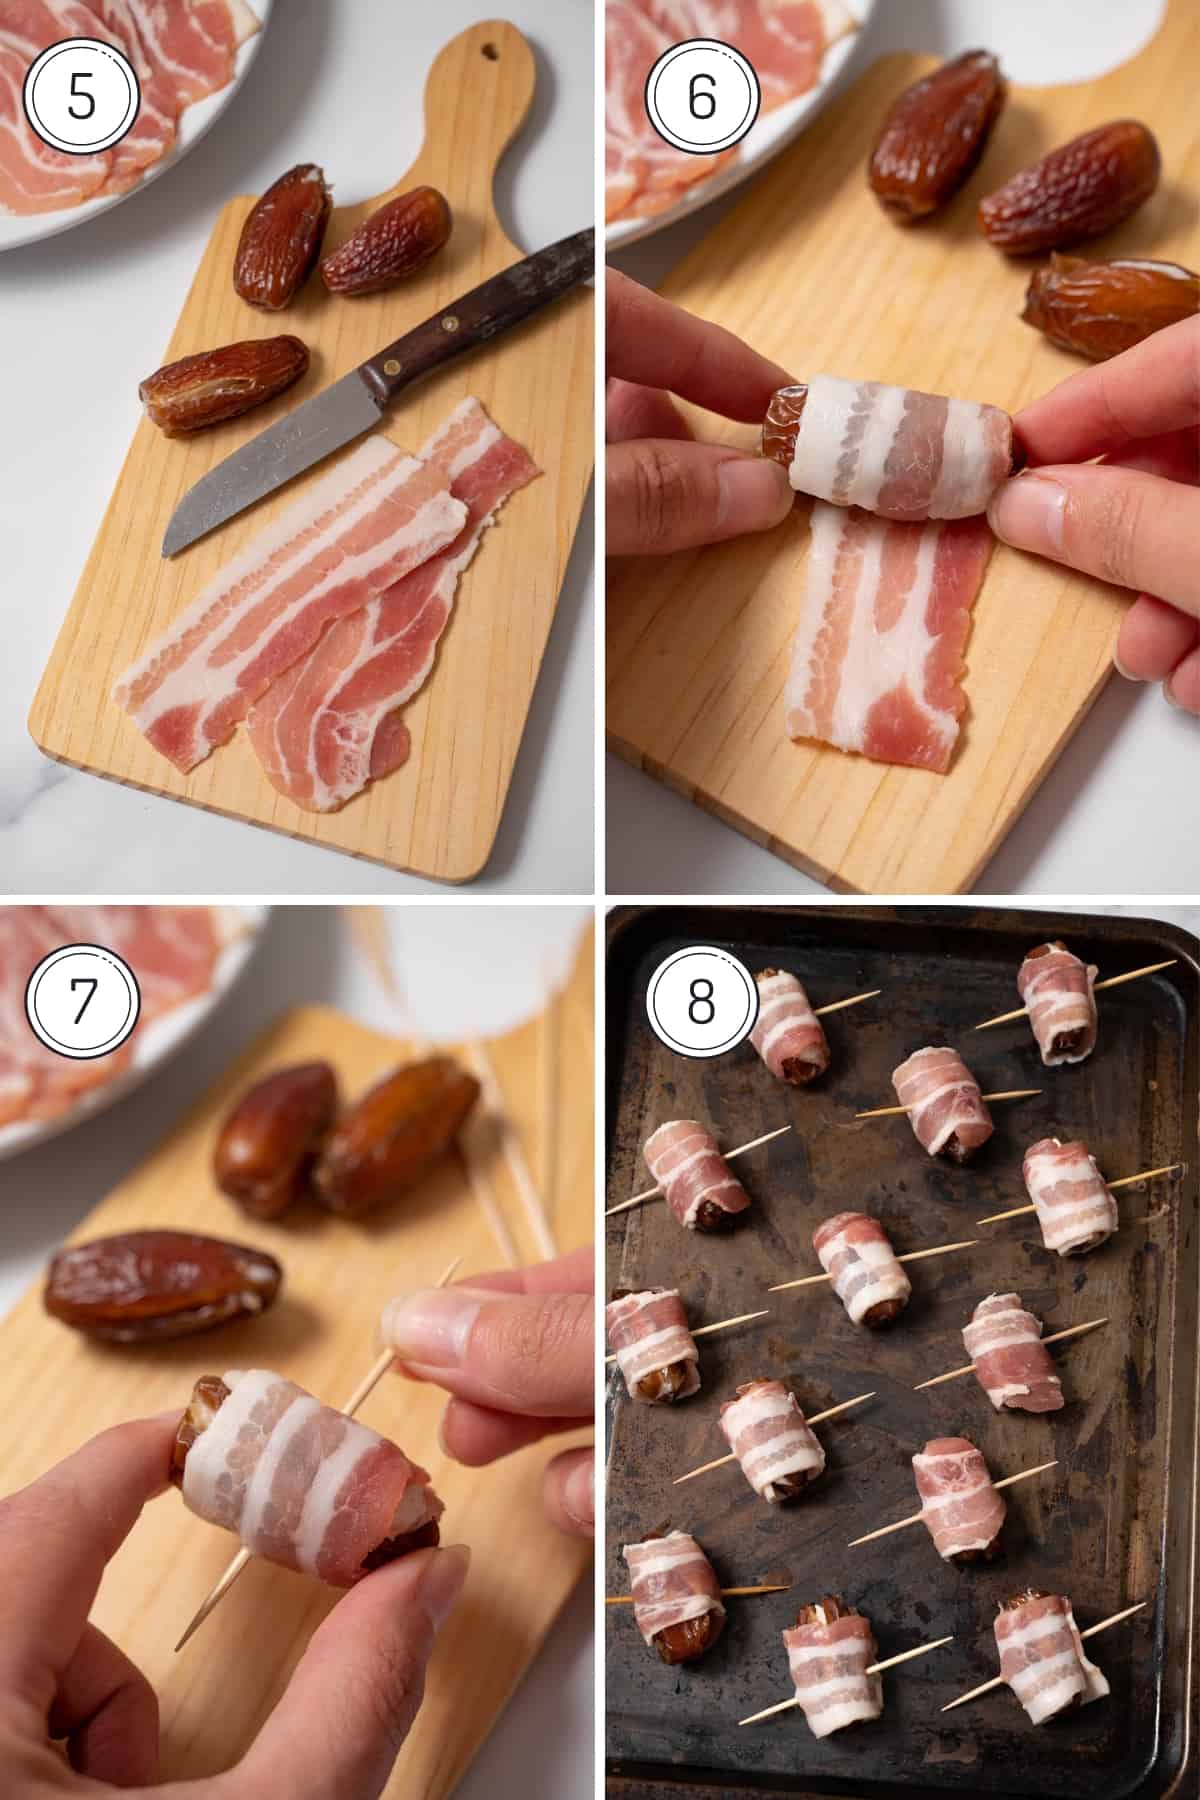 Stuffed dates wrapped in bacon steps 5-8 in a grid. Wrapping the dates with bacon and putting in a toothpick